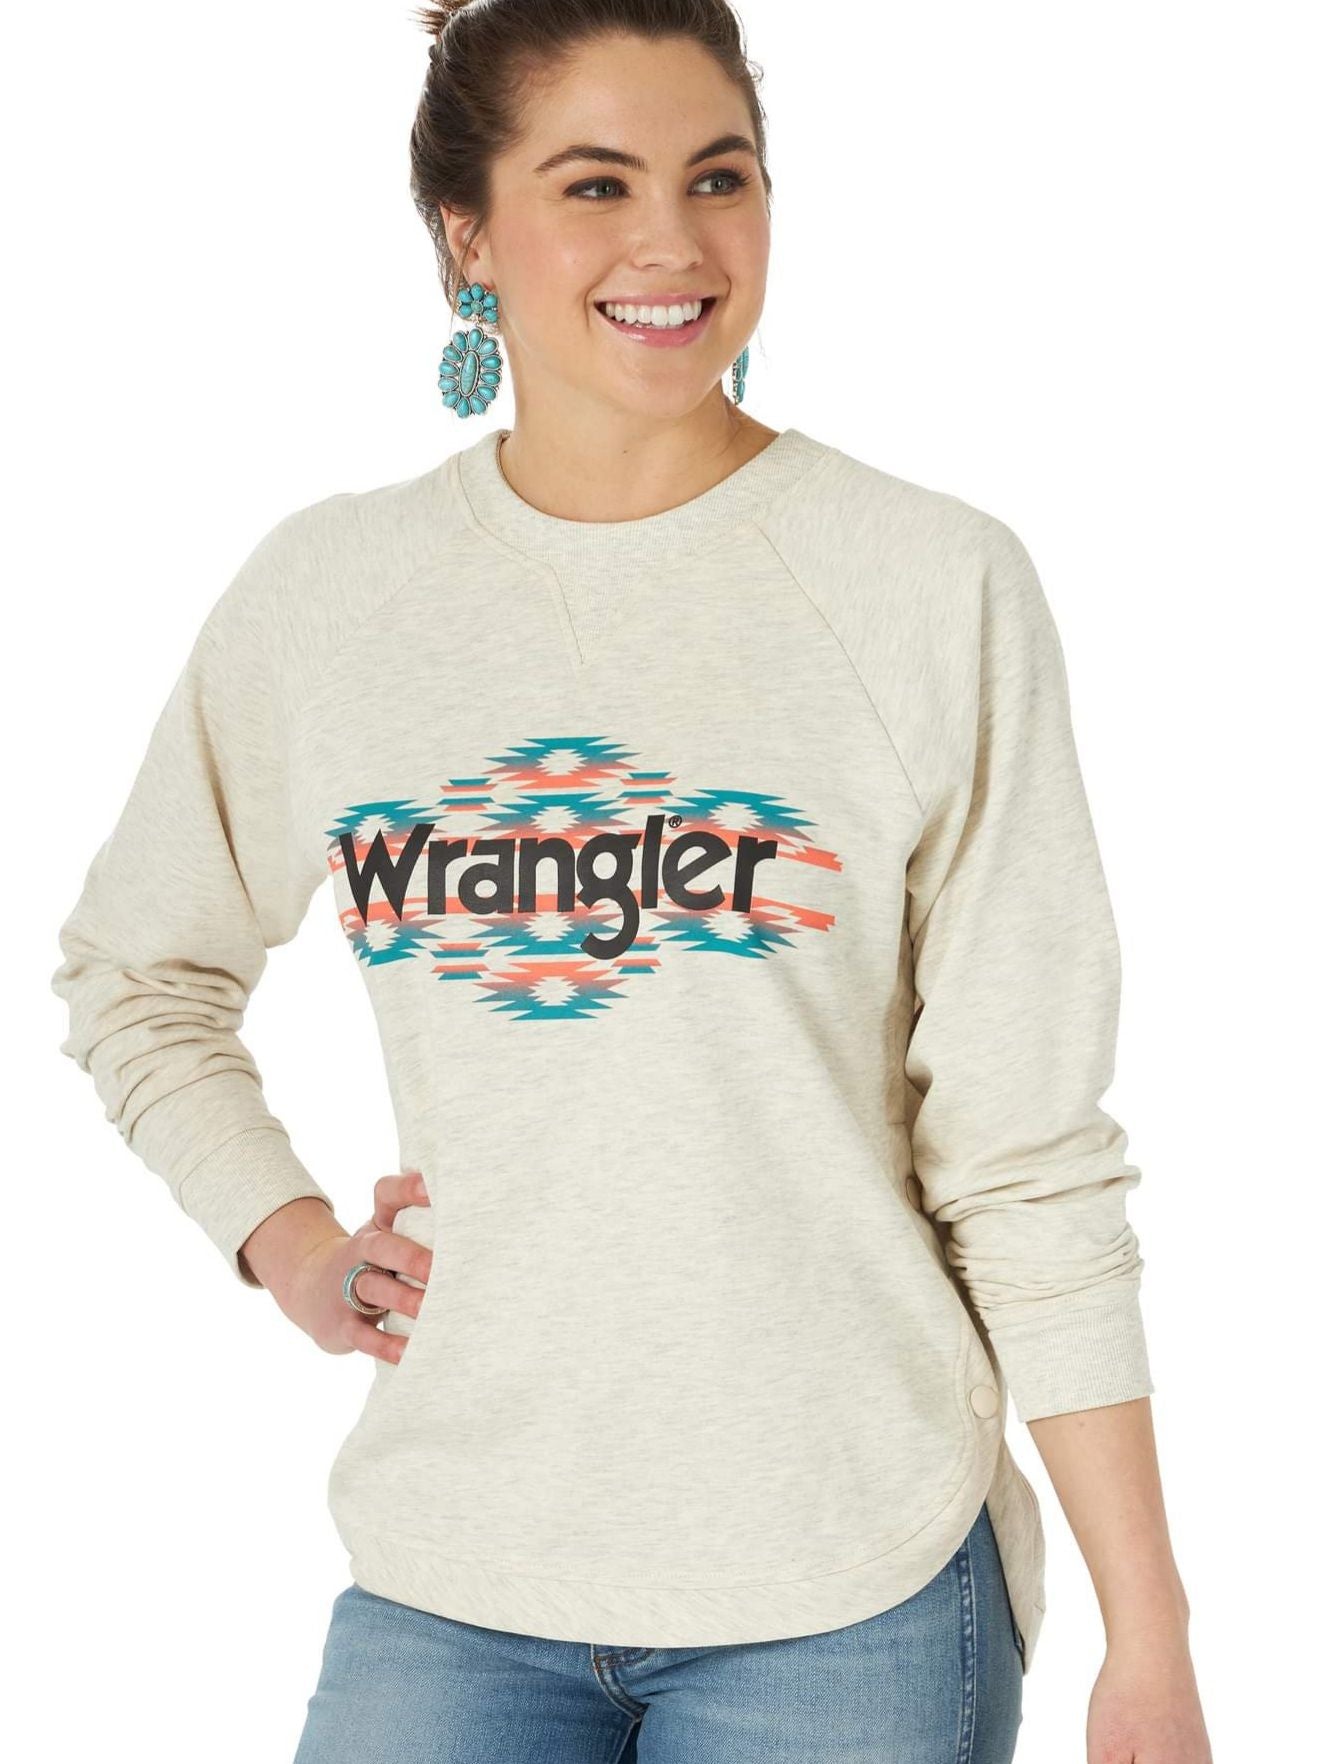 Wrangler USA Casual Sweater Type Top  S or M